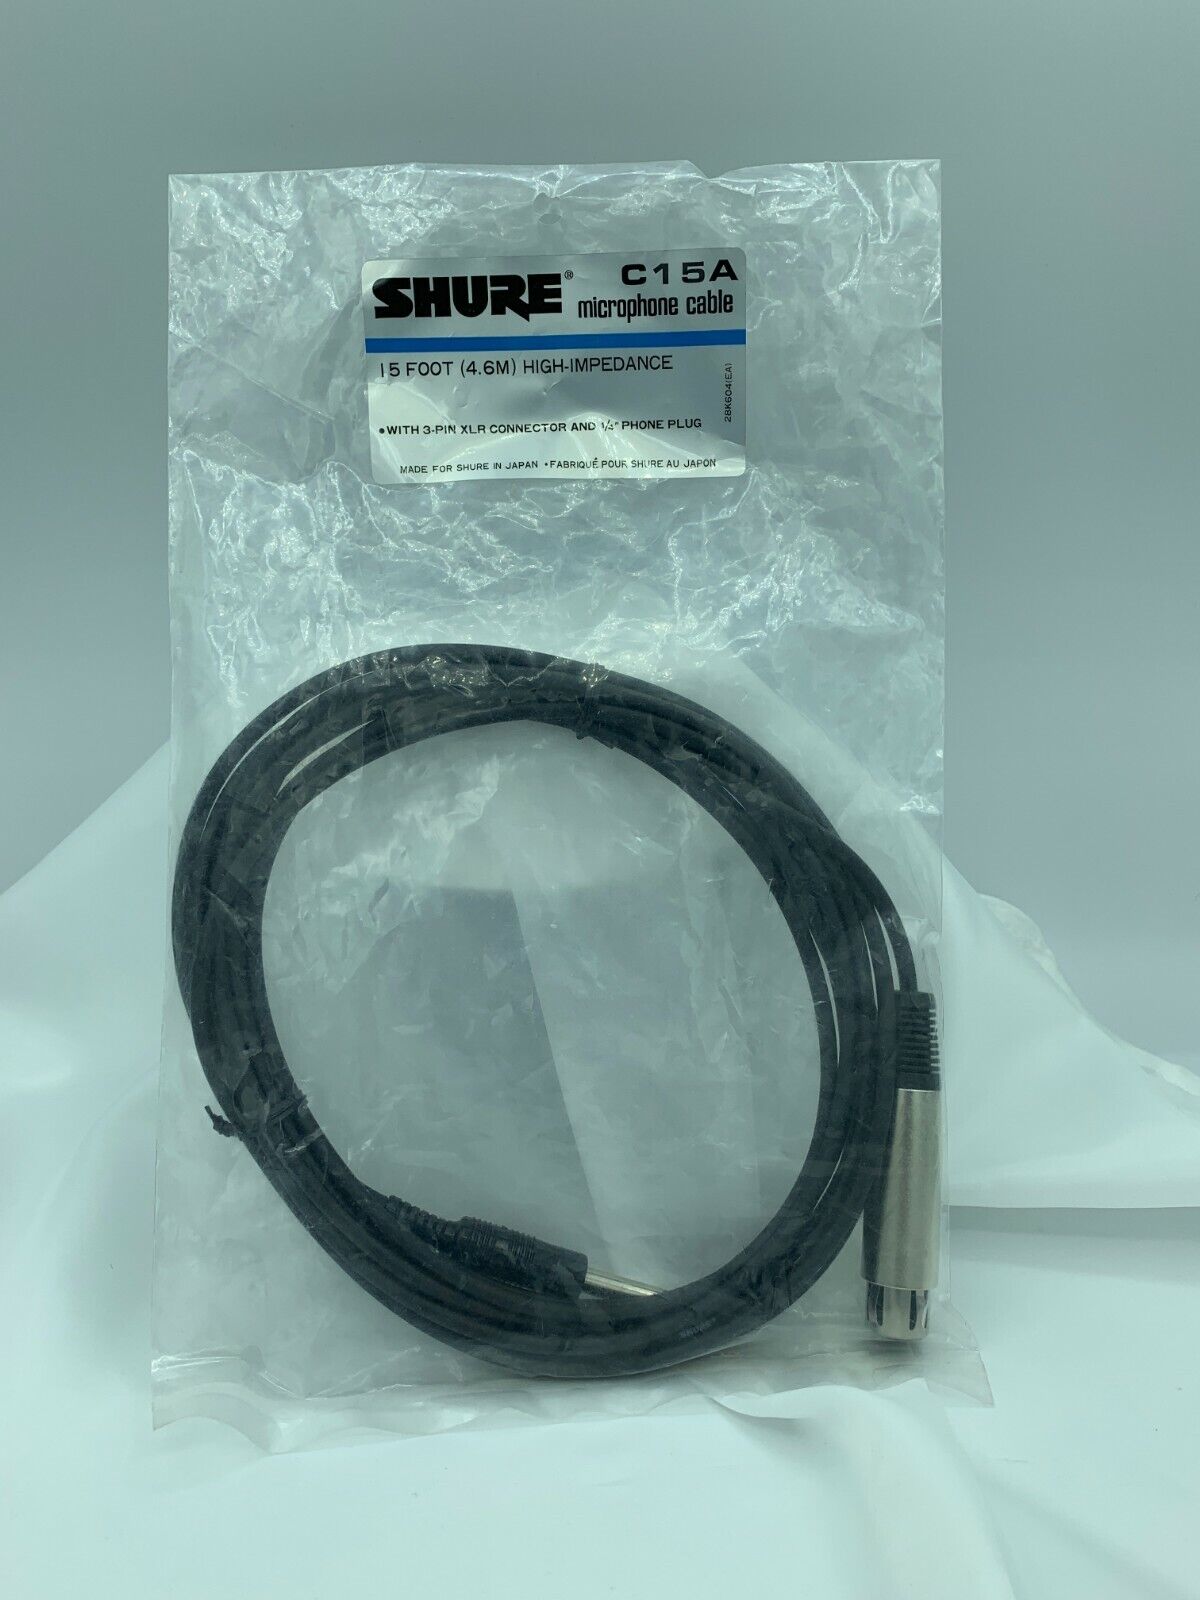 NEW Shure C15A Microphone MIC CABLE 15ft 4.6m High Impedance